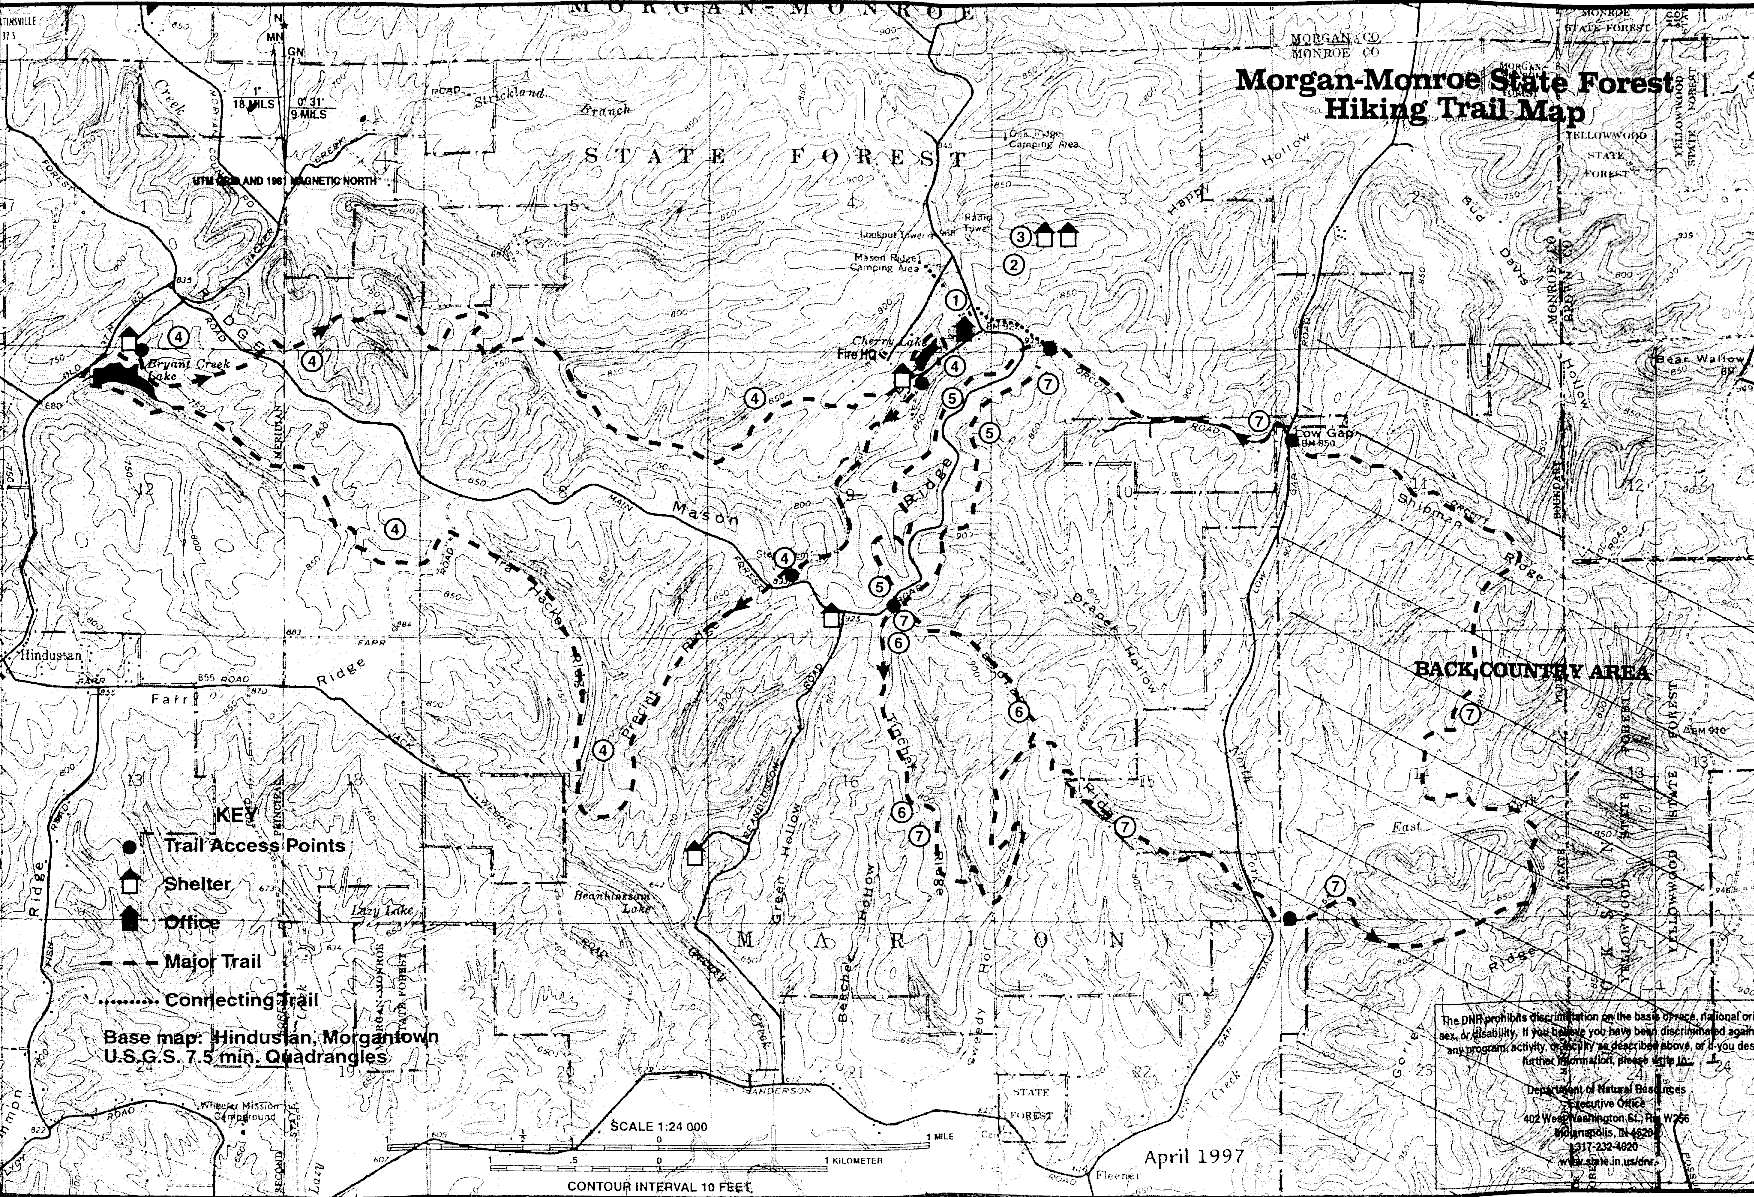 Morgan-Monroe State Forest Hiking Trail Map (Indiana)